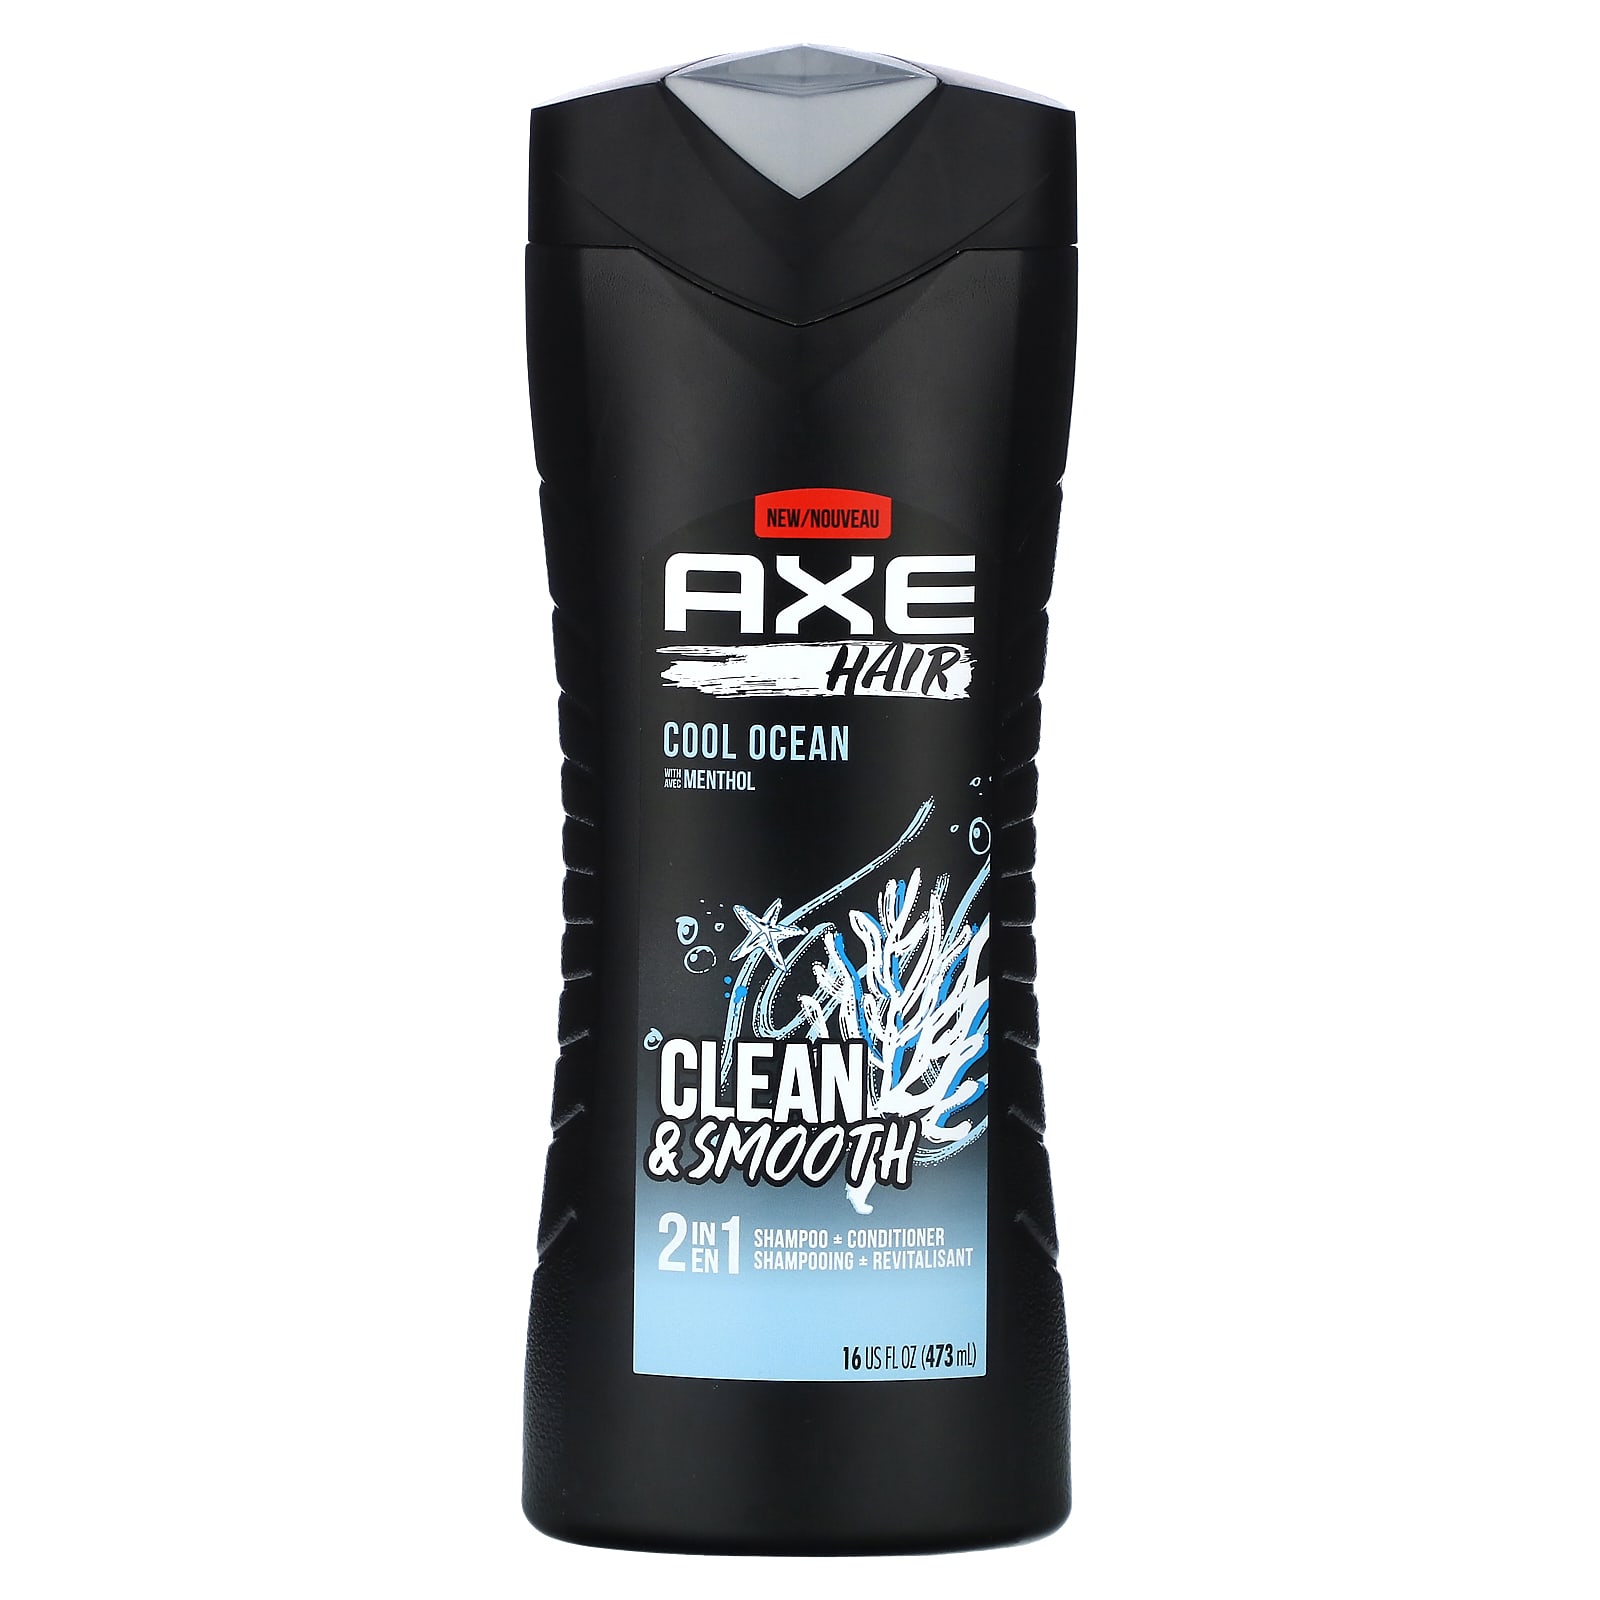 Axe, Hair, Clean & Smooth, 2 In 1 Shampoo + Conditioner, Cool Ocean, 16 ...